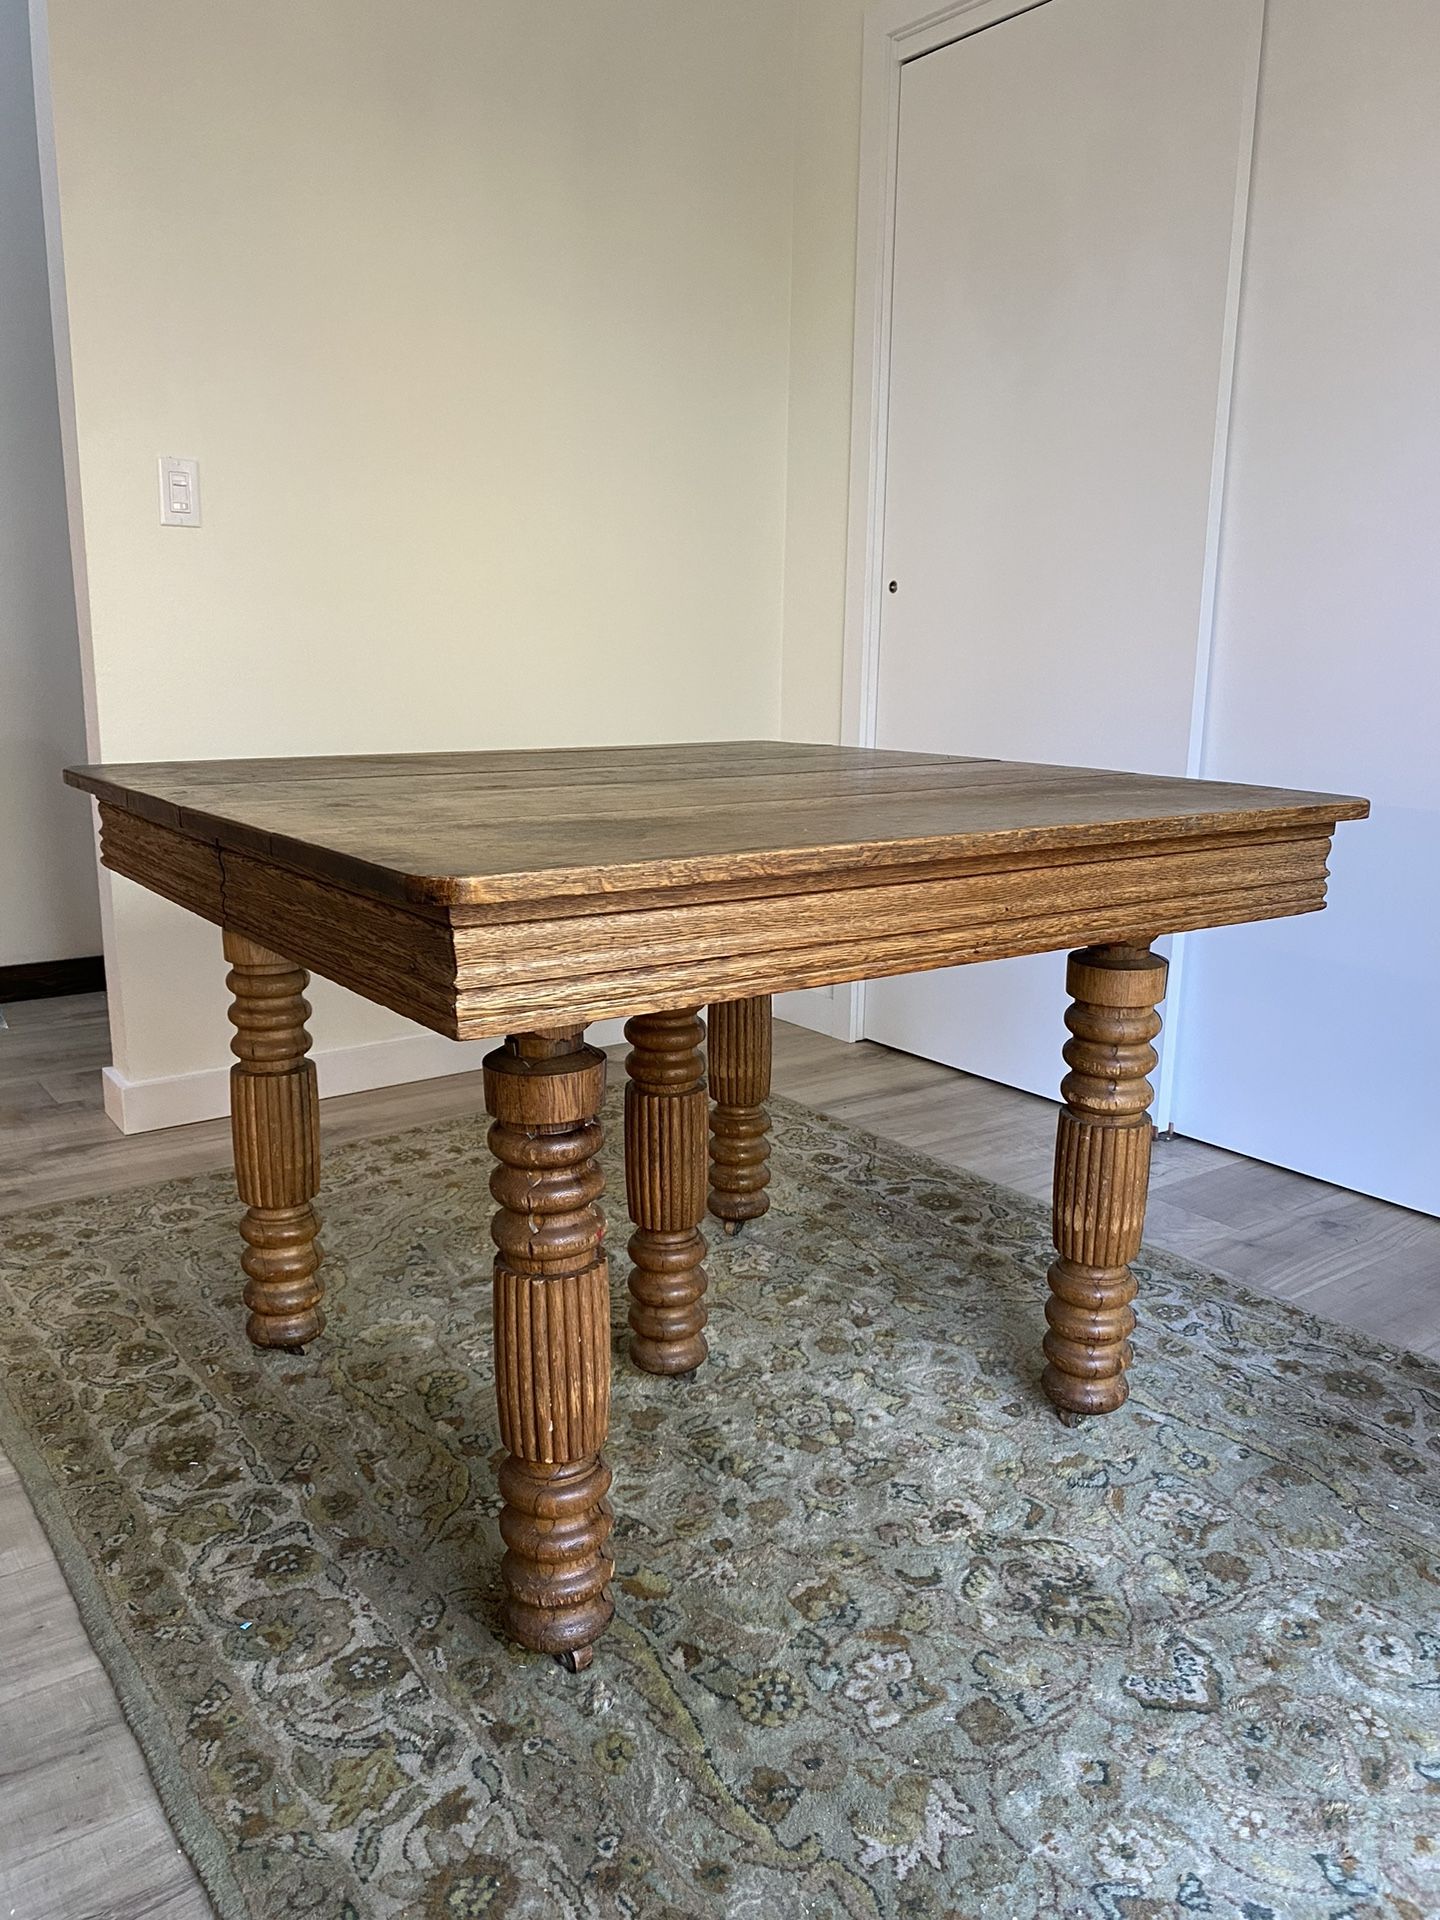 Solid Oak Kitchen Table With 2 Leaves And 6 Chairs ($300 OBO)